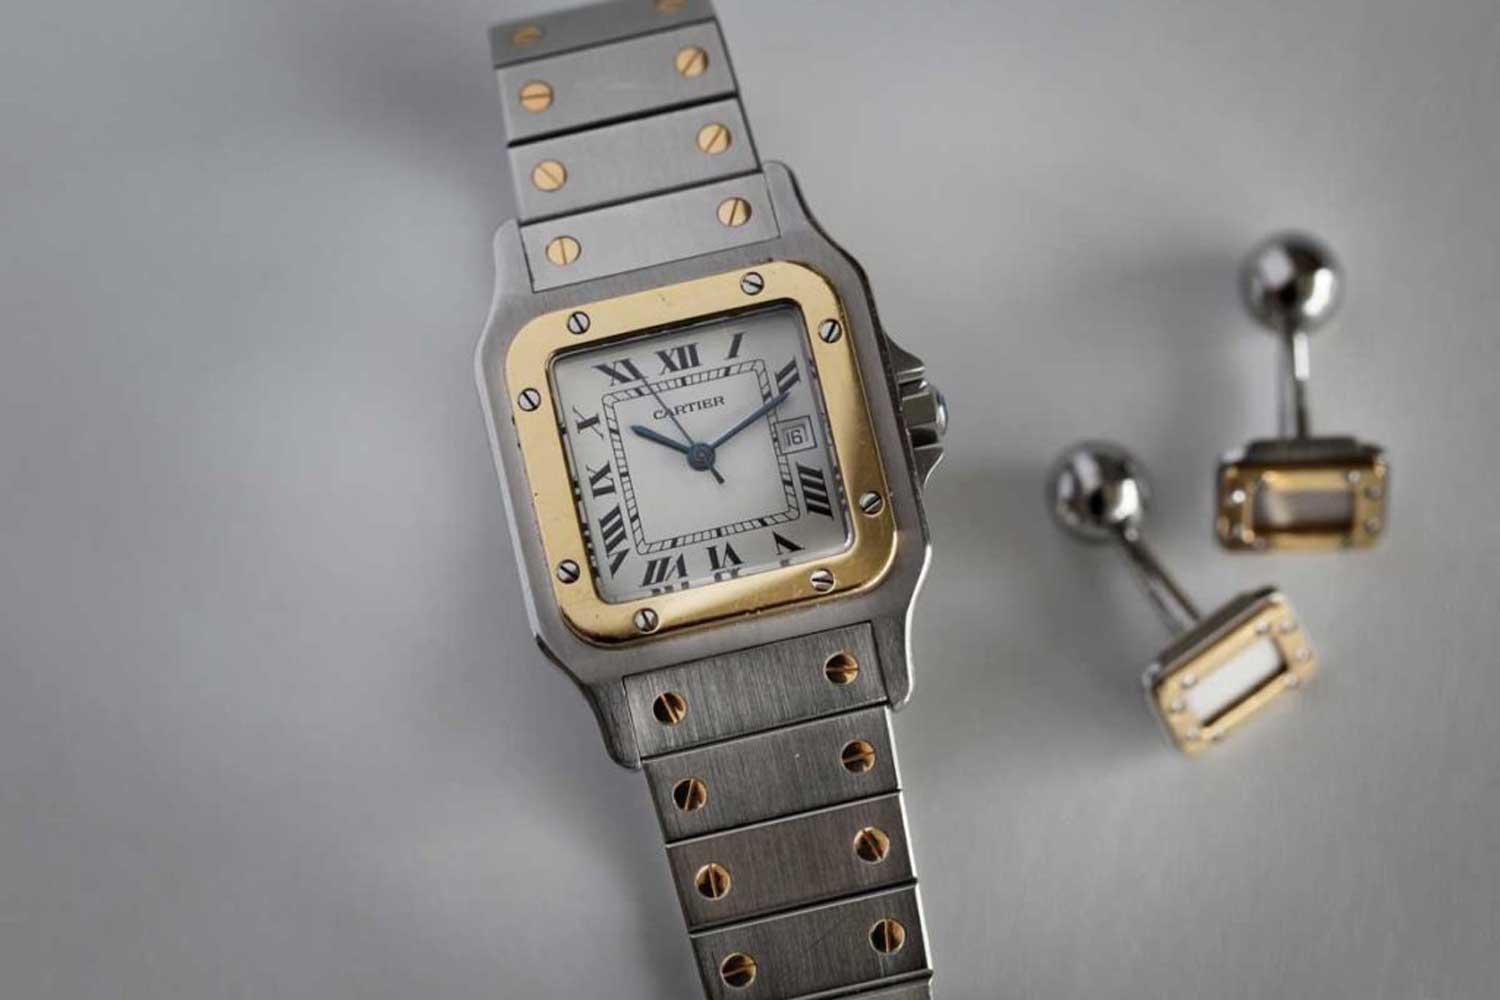 The 1978 two-tone Santos launched by Cartier under the stewardship of Alain-Dominique Perrin(© George Cramer)